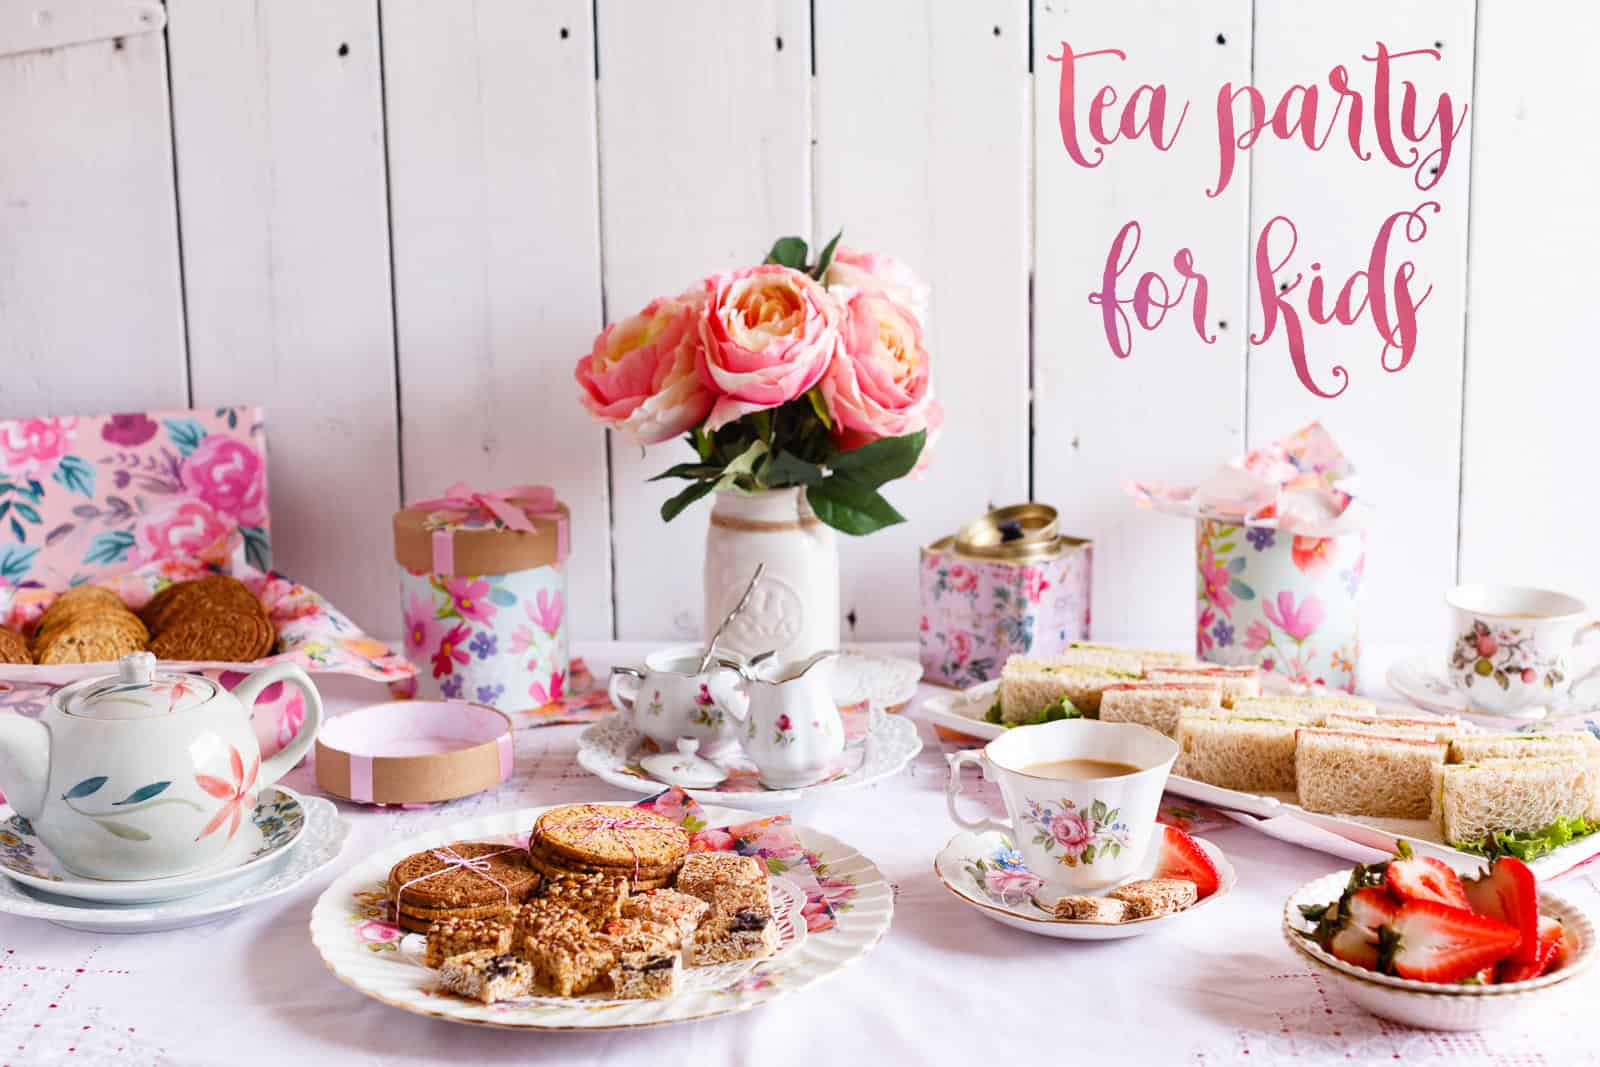 Tea Party Decorations - How To High Tea